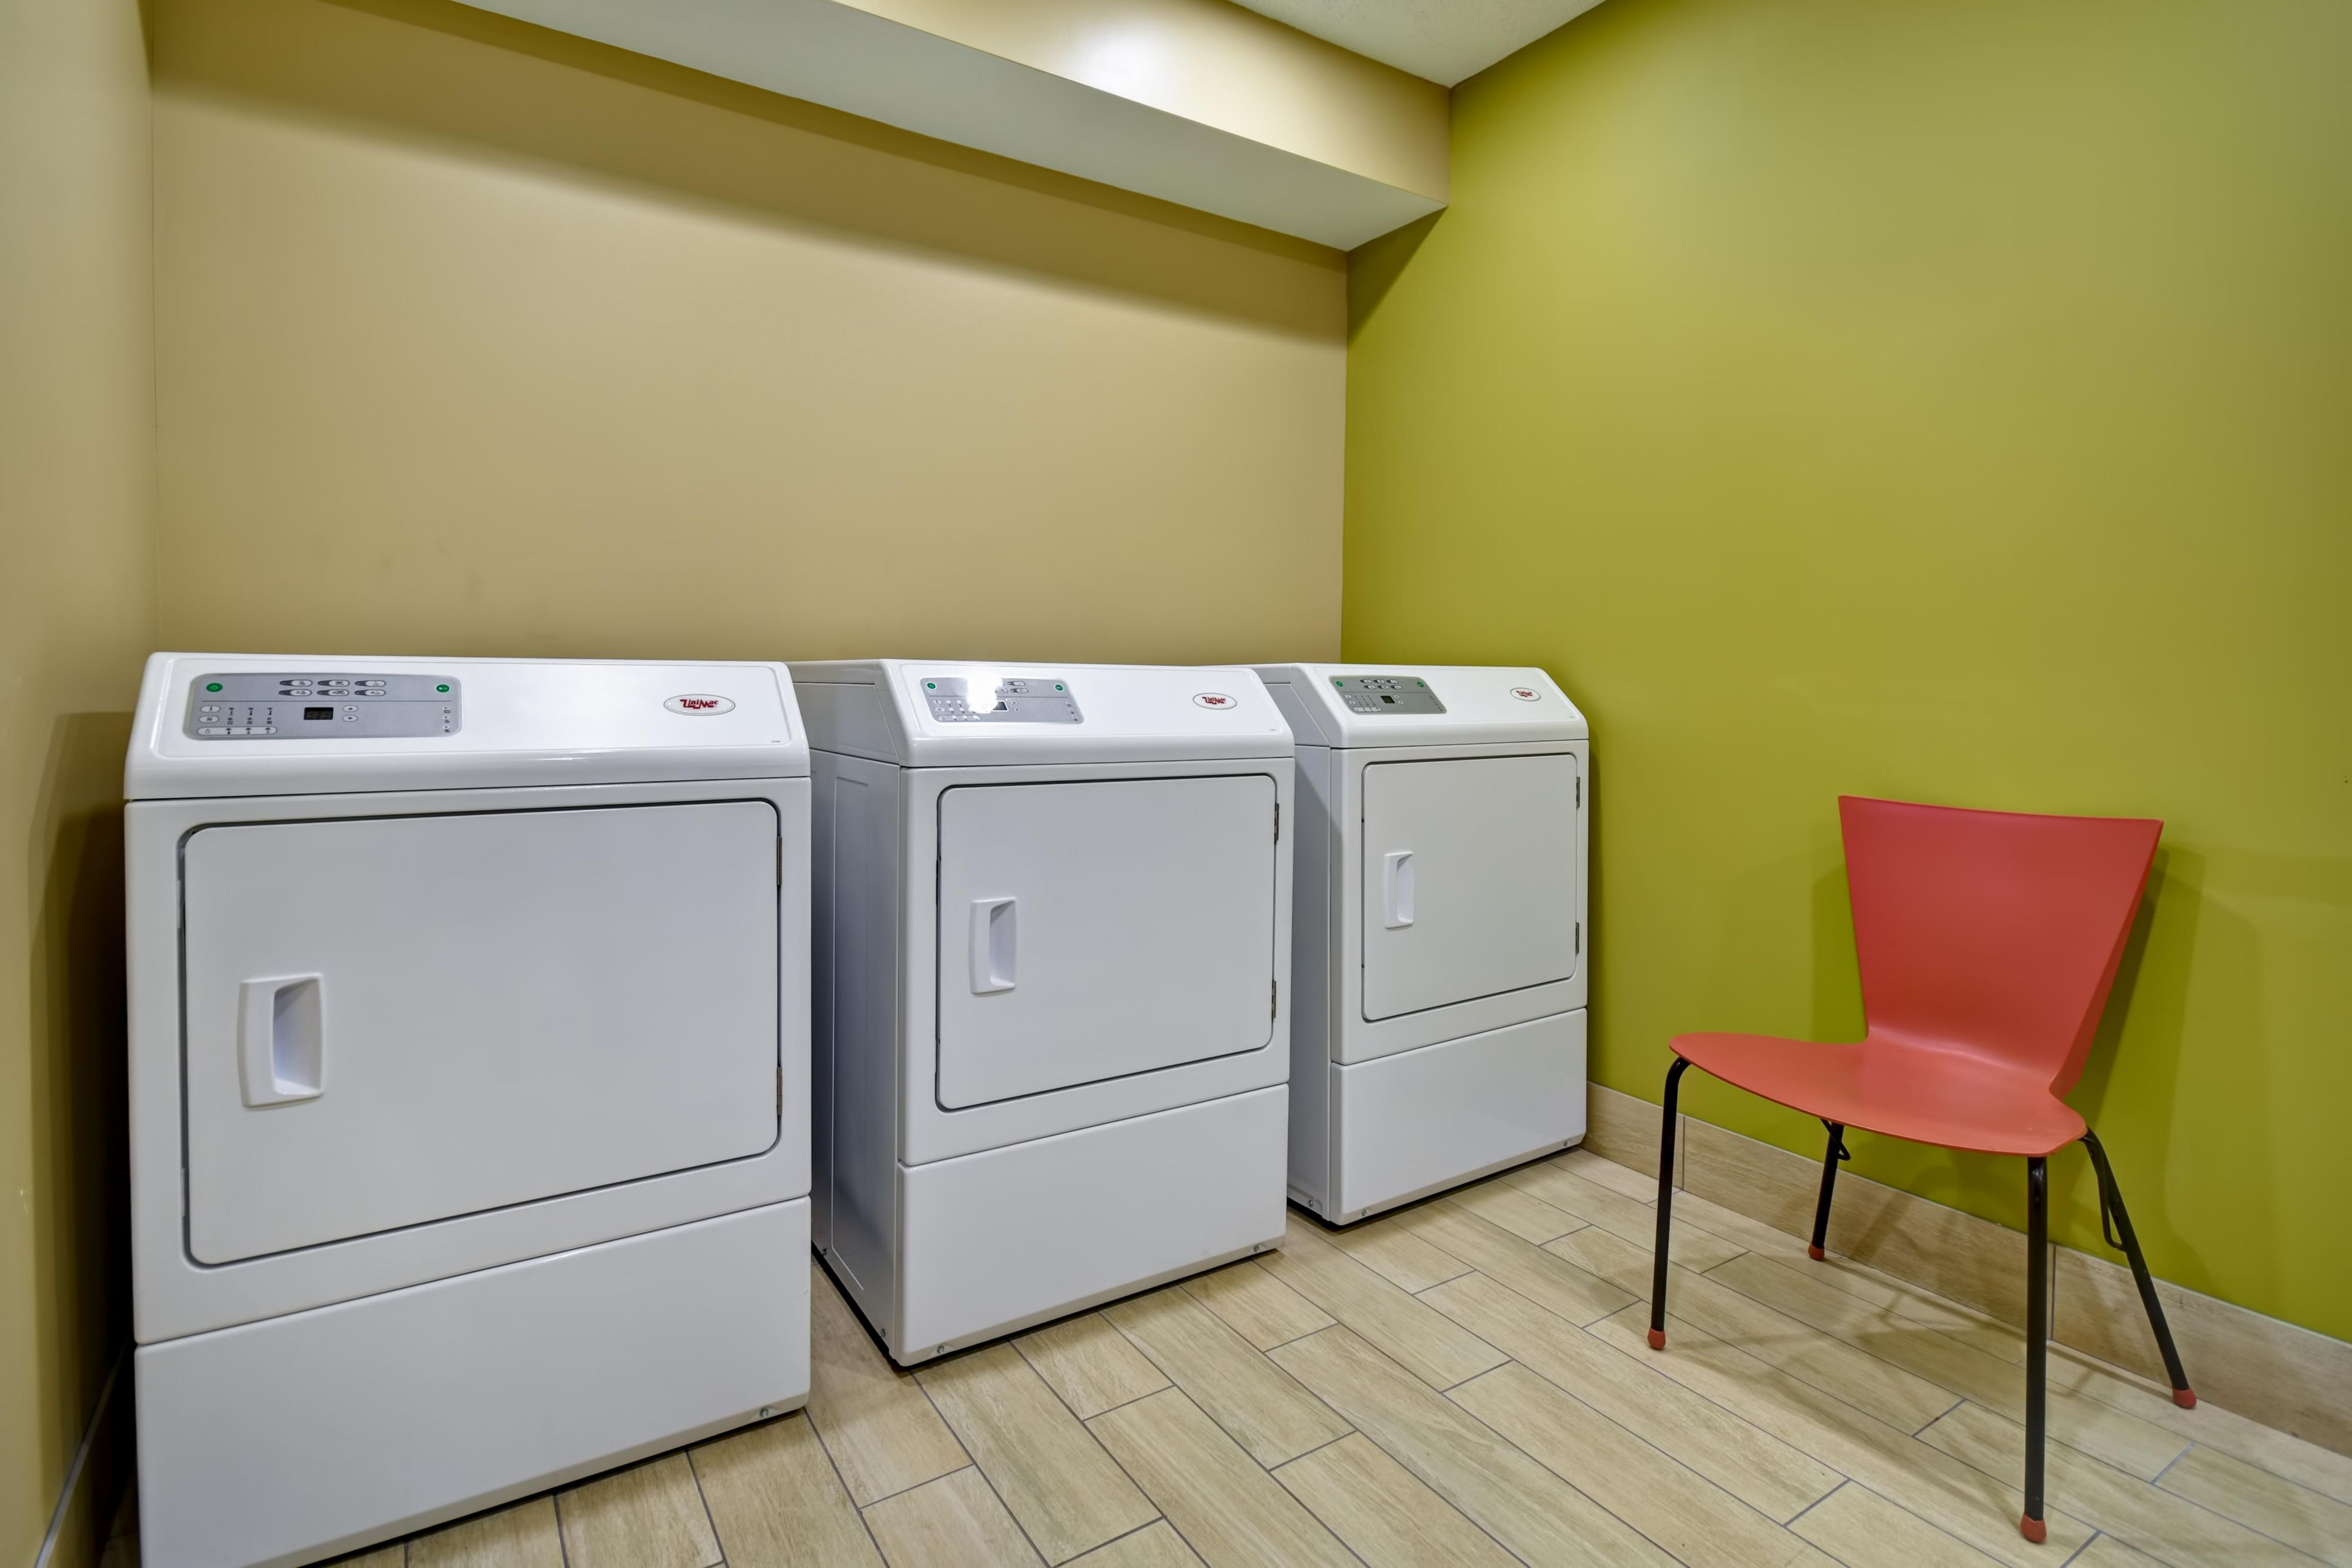 Free 24/7 COMPLIMENTARY on-site Guest self–laundry facility. We offer Dry Cleaning Pickup/Laundry same day services. Light cleaning daily.